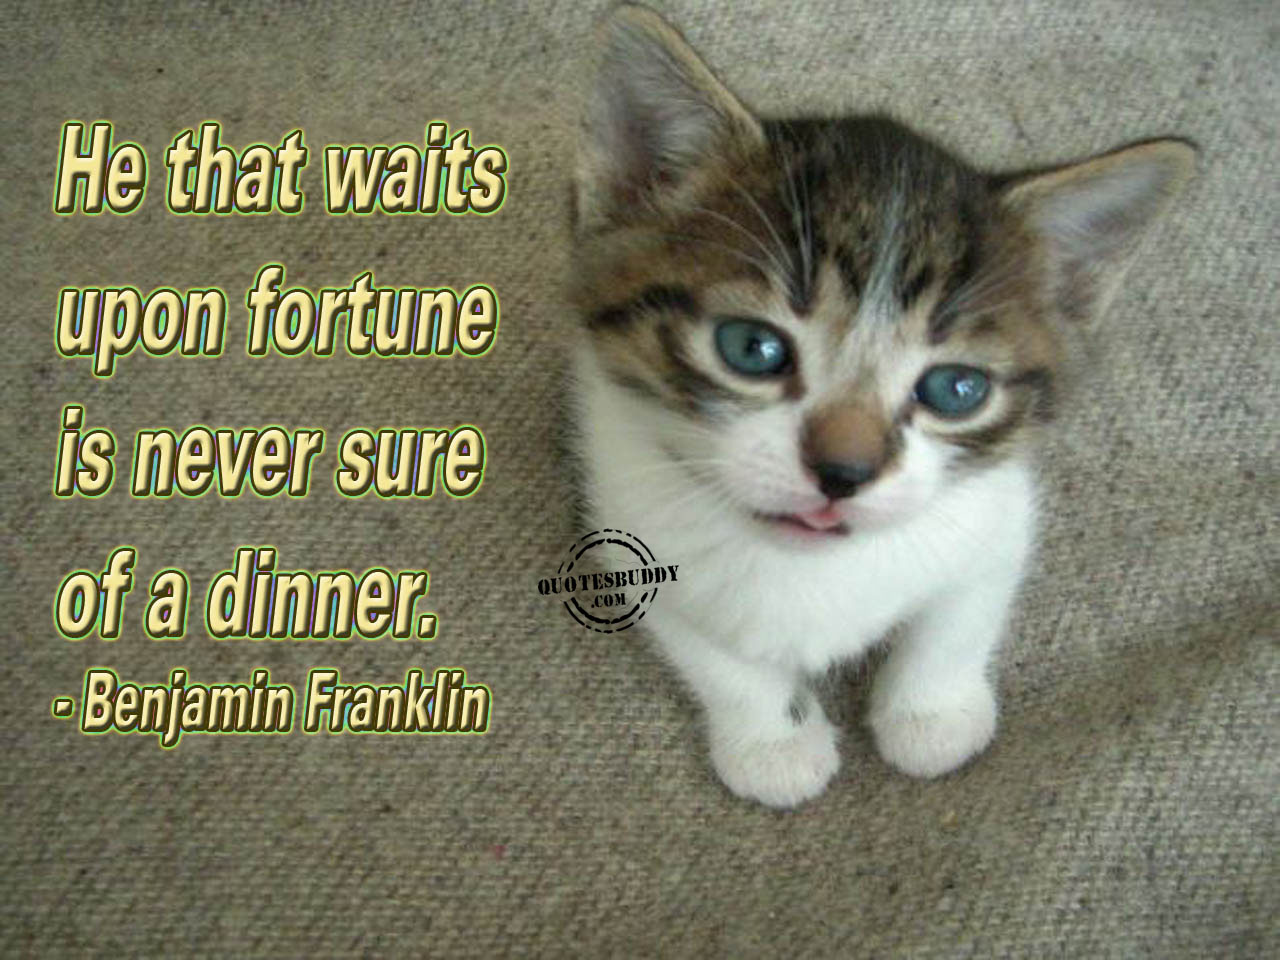 He that waits upon fortune is never sure of a dinner. Benjamin Franklin